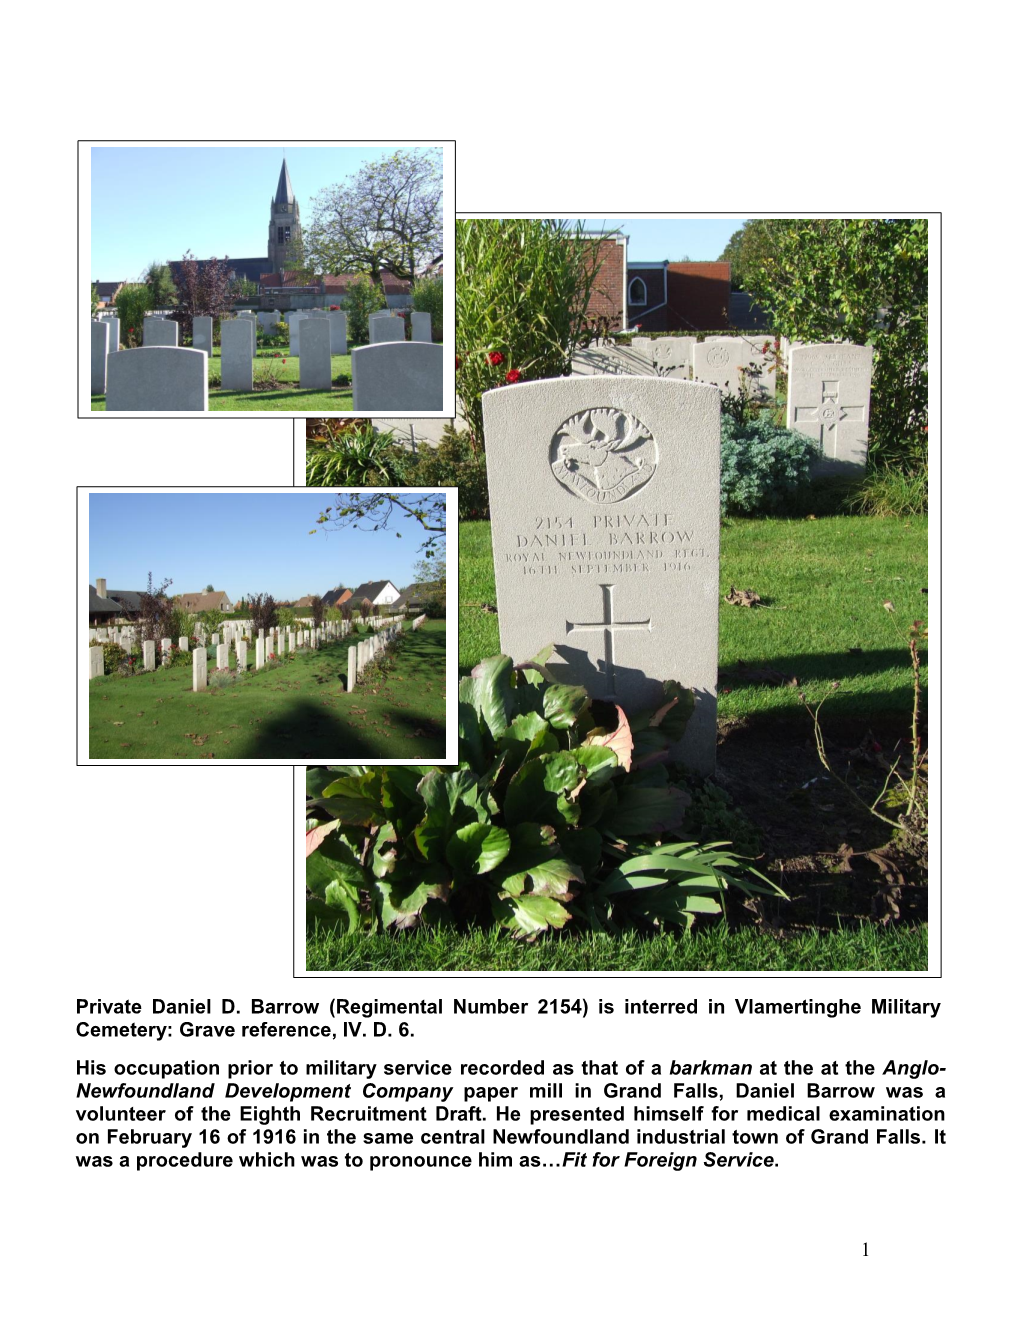 Private Daniel D. Barrow (Regimental Number 2154) Is Interred in Vlamertinghe Military Cemetery: Grave Reference, IV